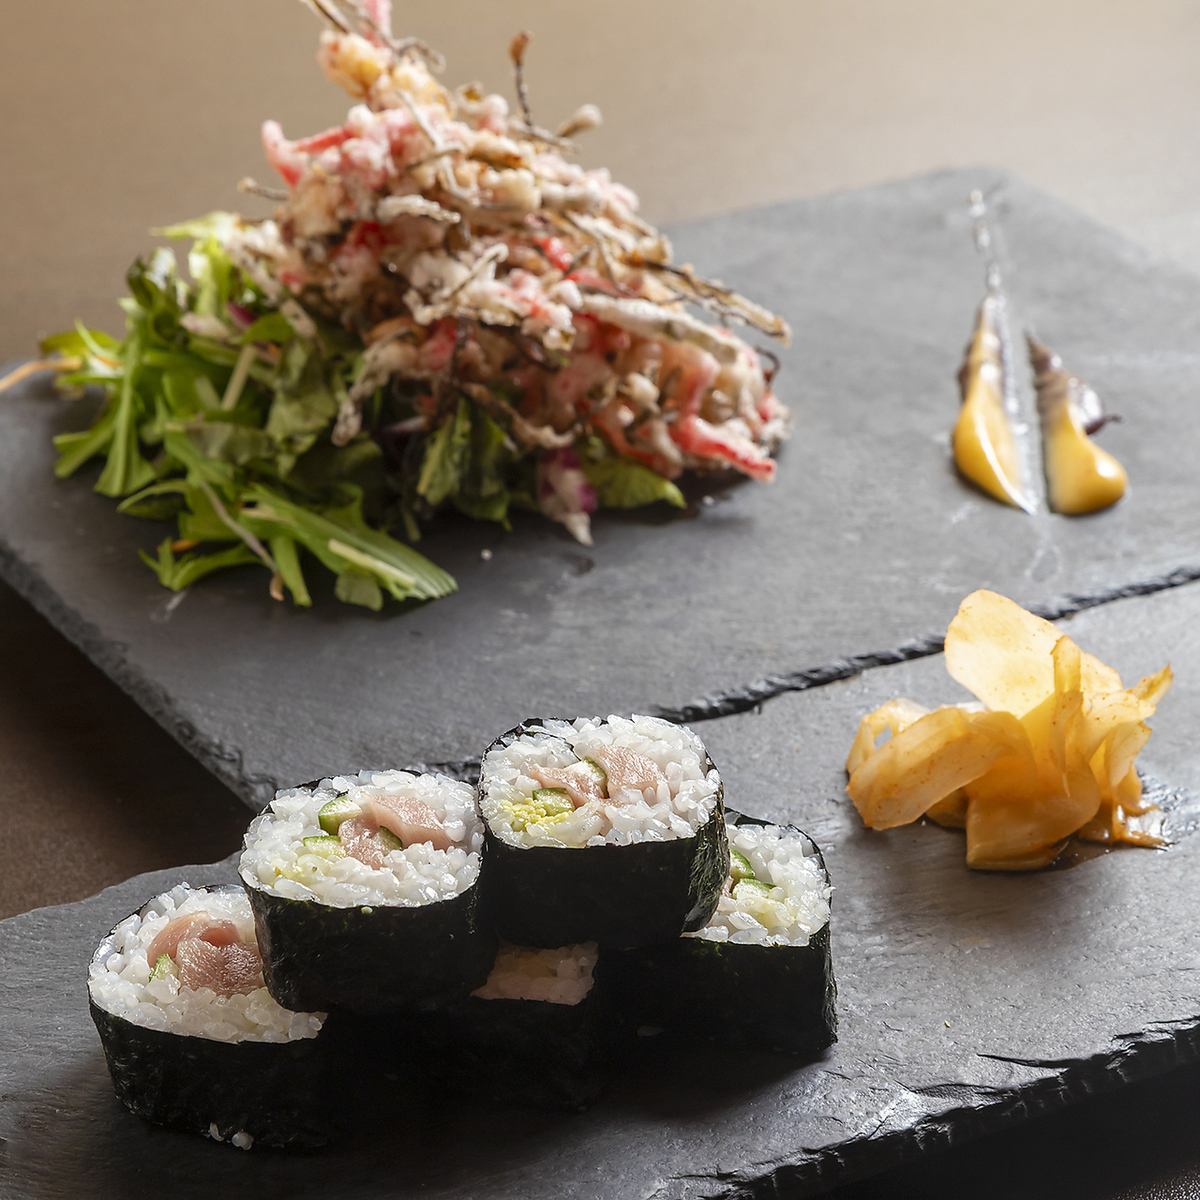 Popular for dates ♪ Enjoy our original Japanese food in a stylish space